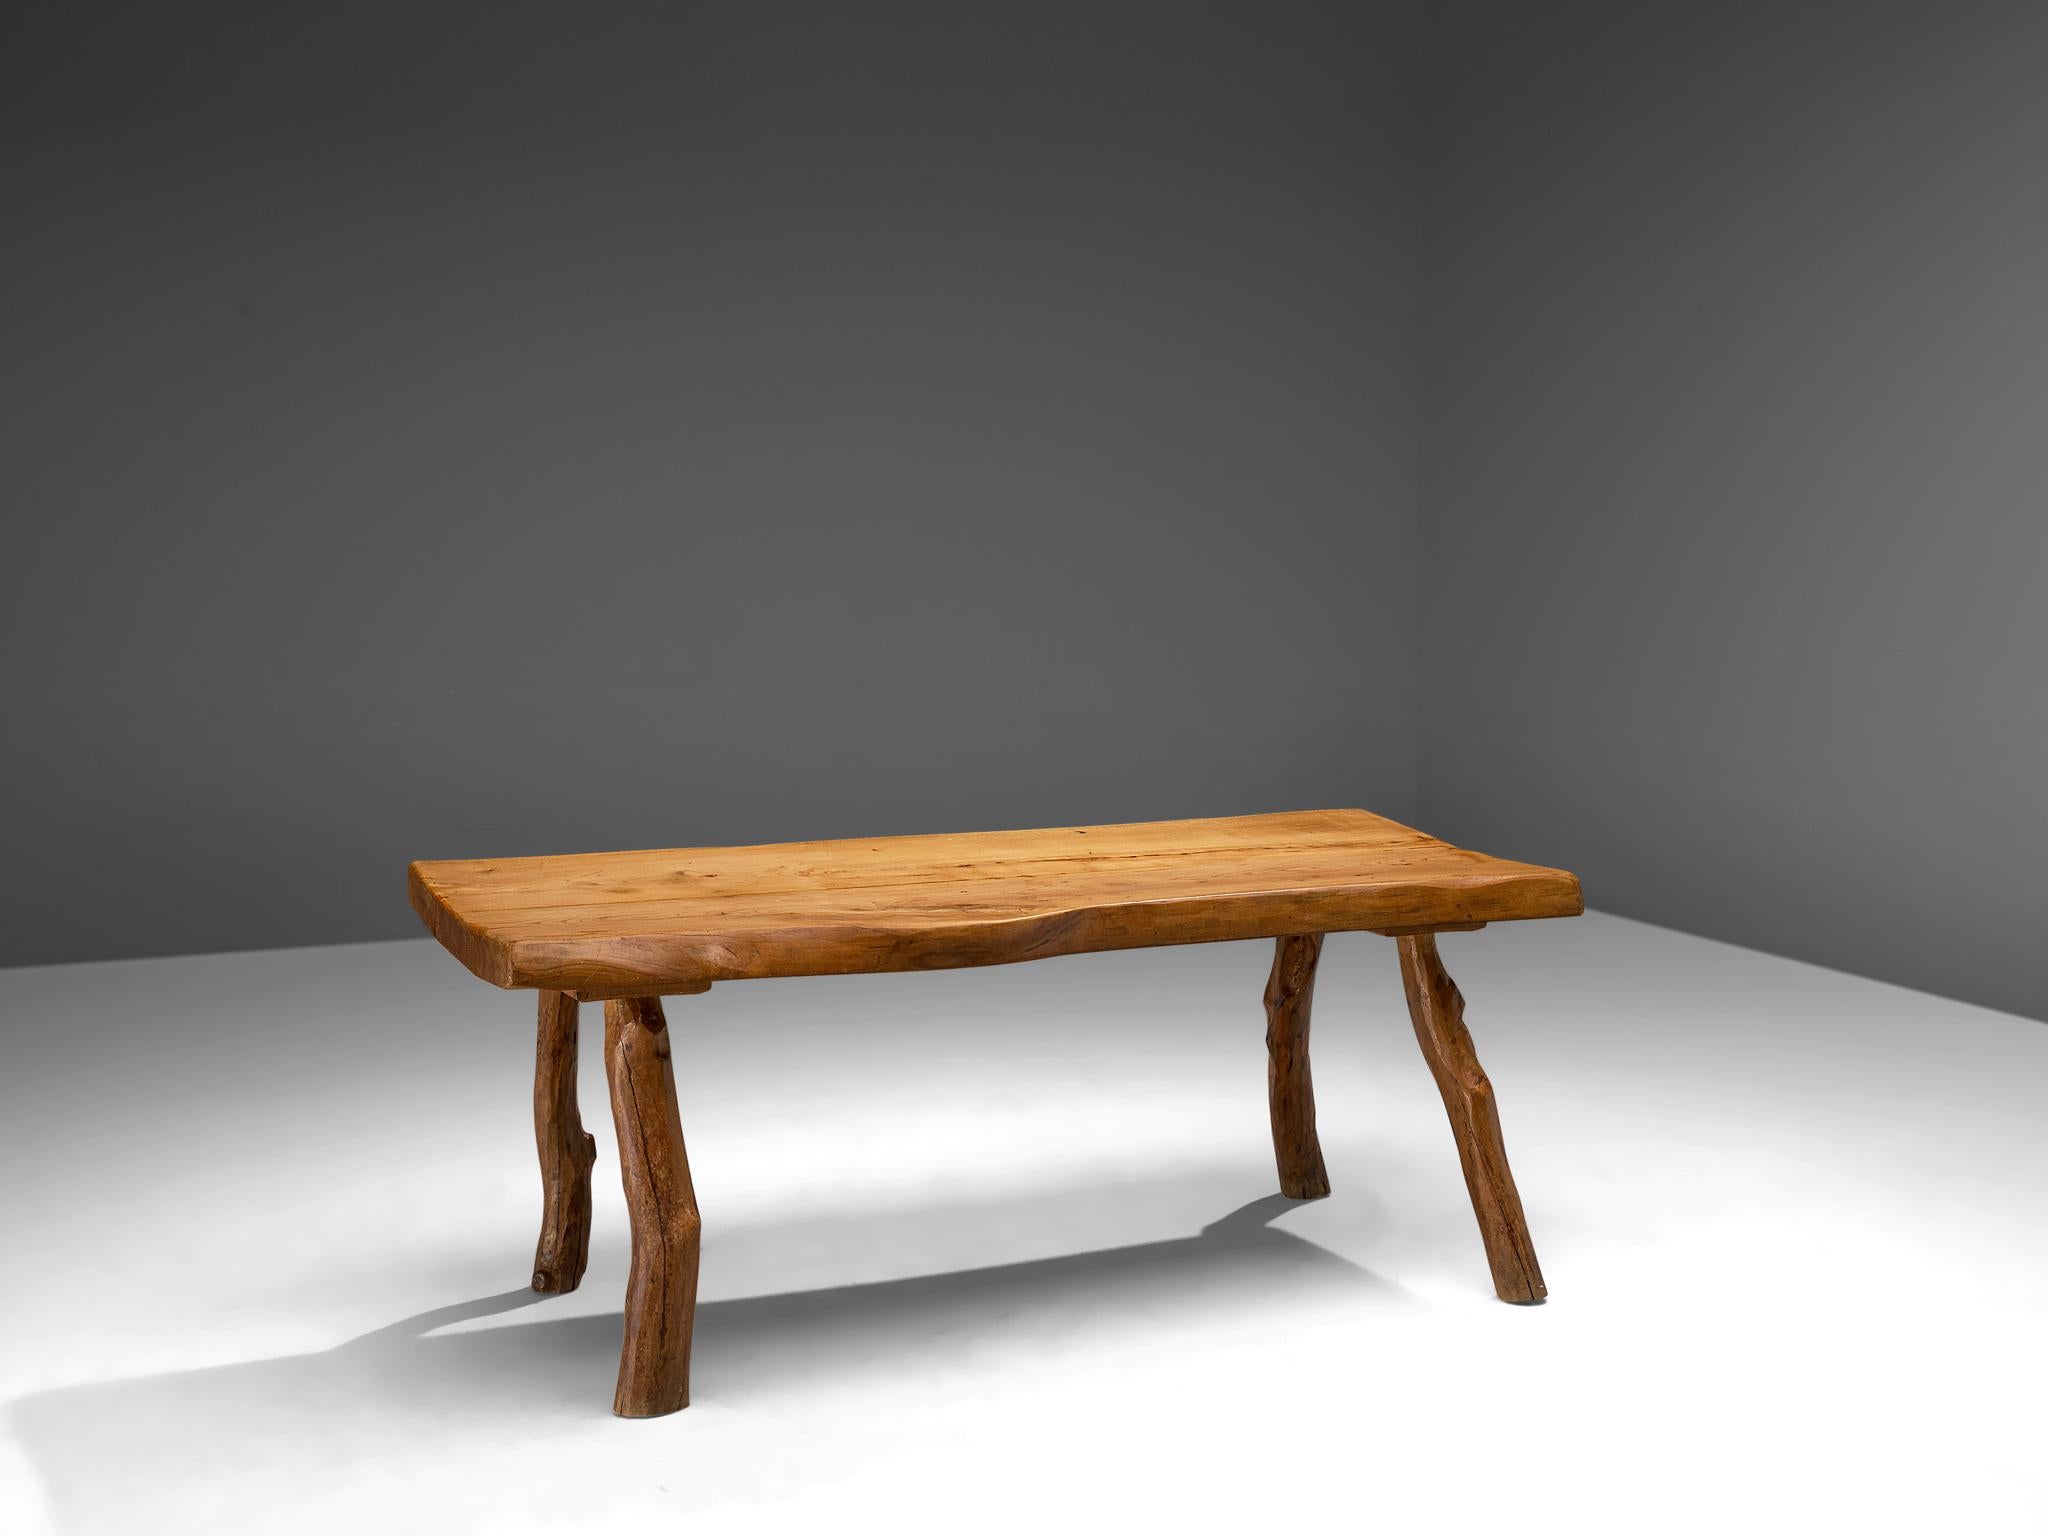 Dining table, oak, Europe, 1960s.

Oak wooden dining table that features robust design with organic elements. The bulky table is executed in solid oak that developed a nice, rustic patina from age and use. The design features a thick table top